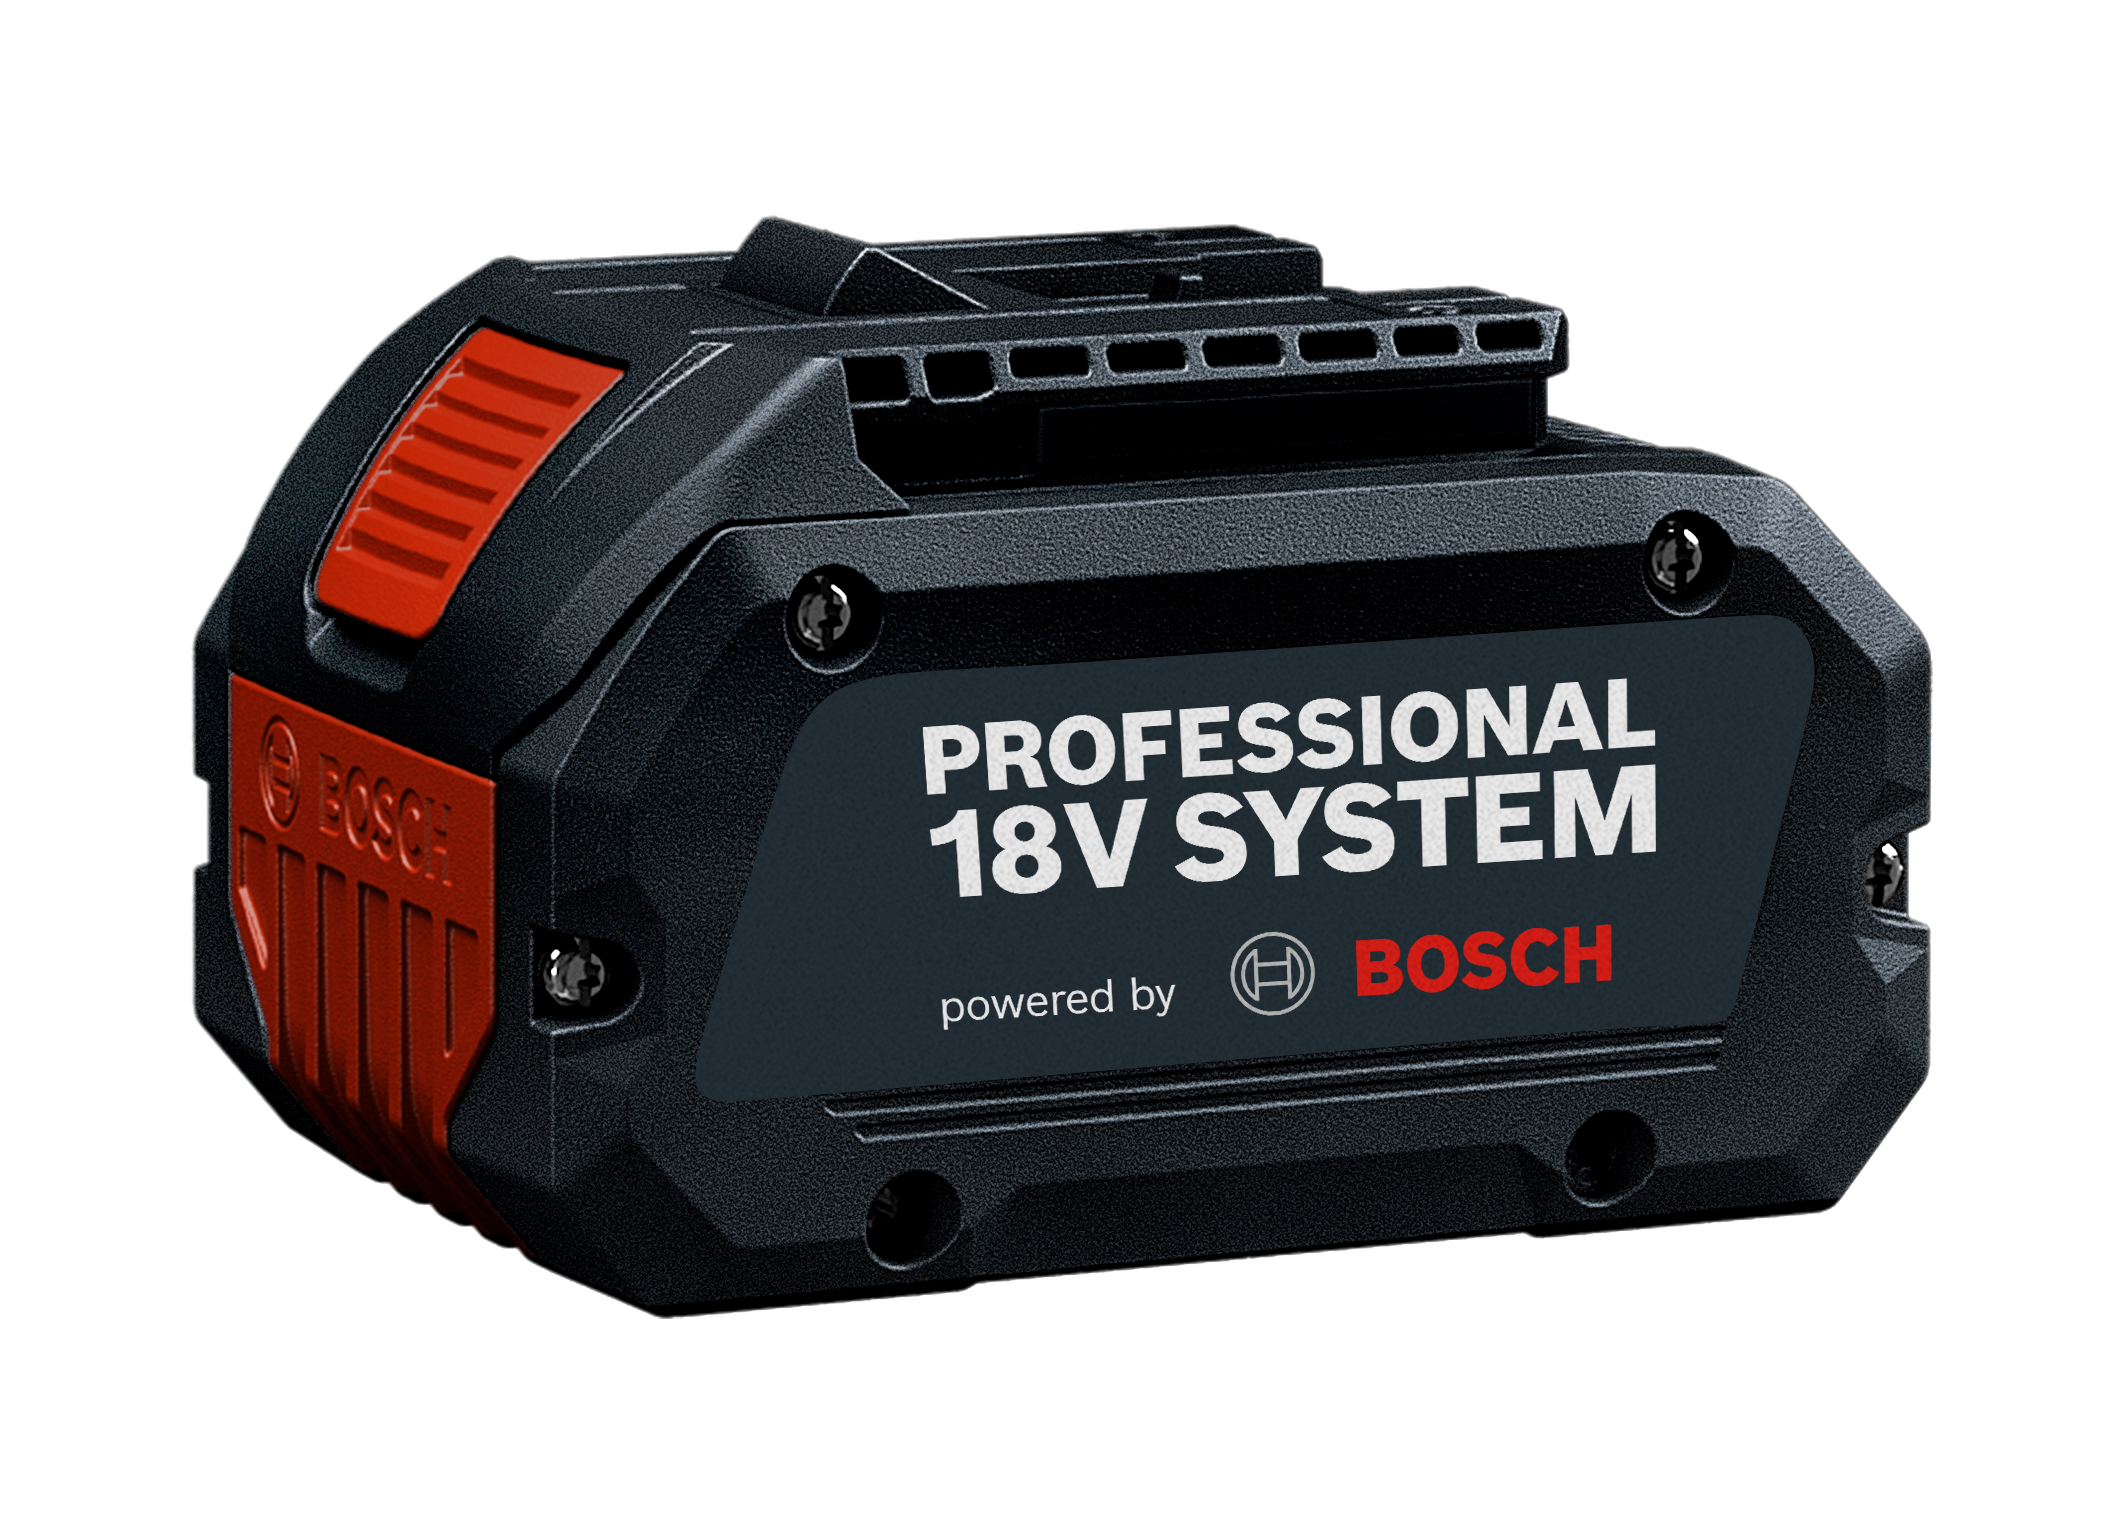 New growth in the Professional 18V System: Professional outdoor equipment  from Bosch - Bosch Media Service